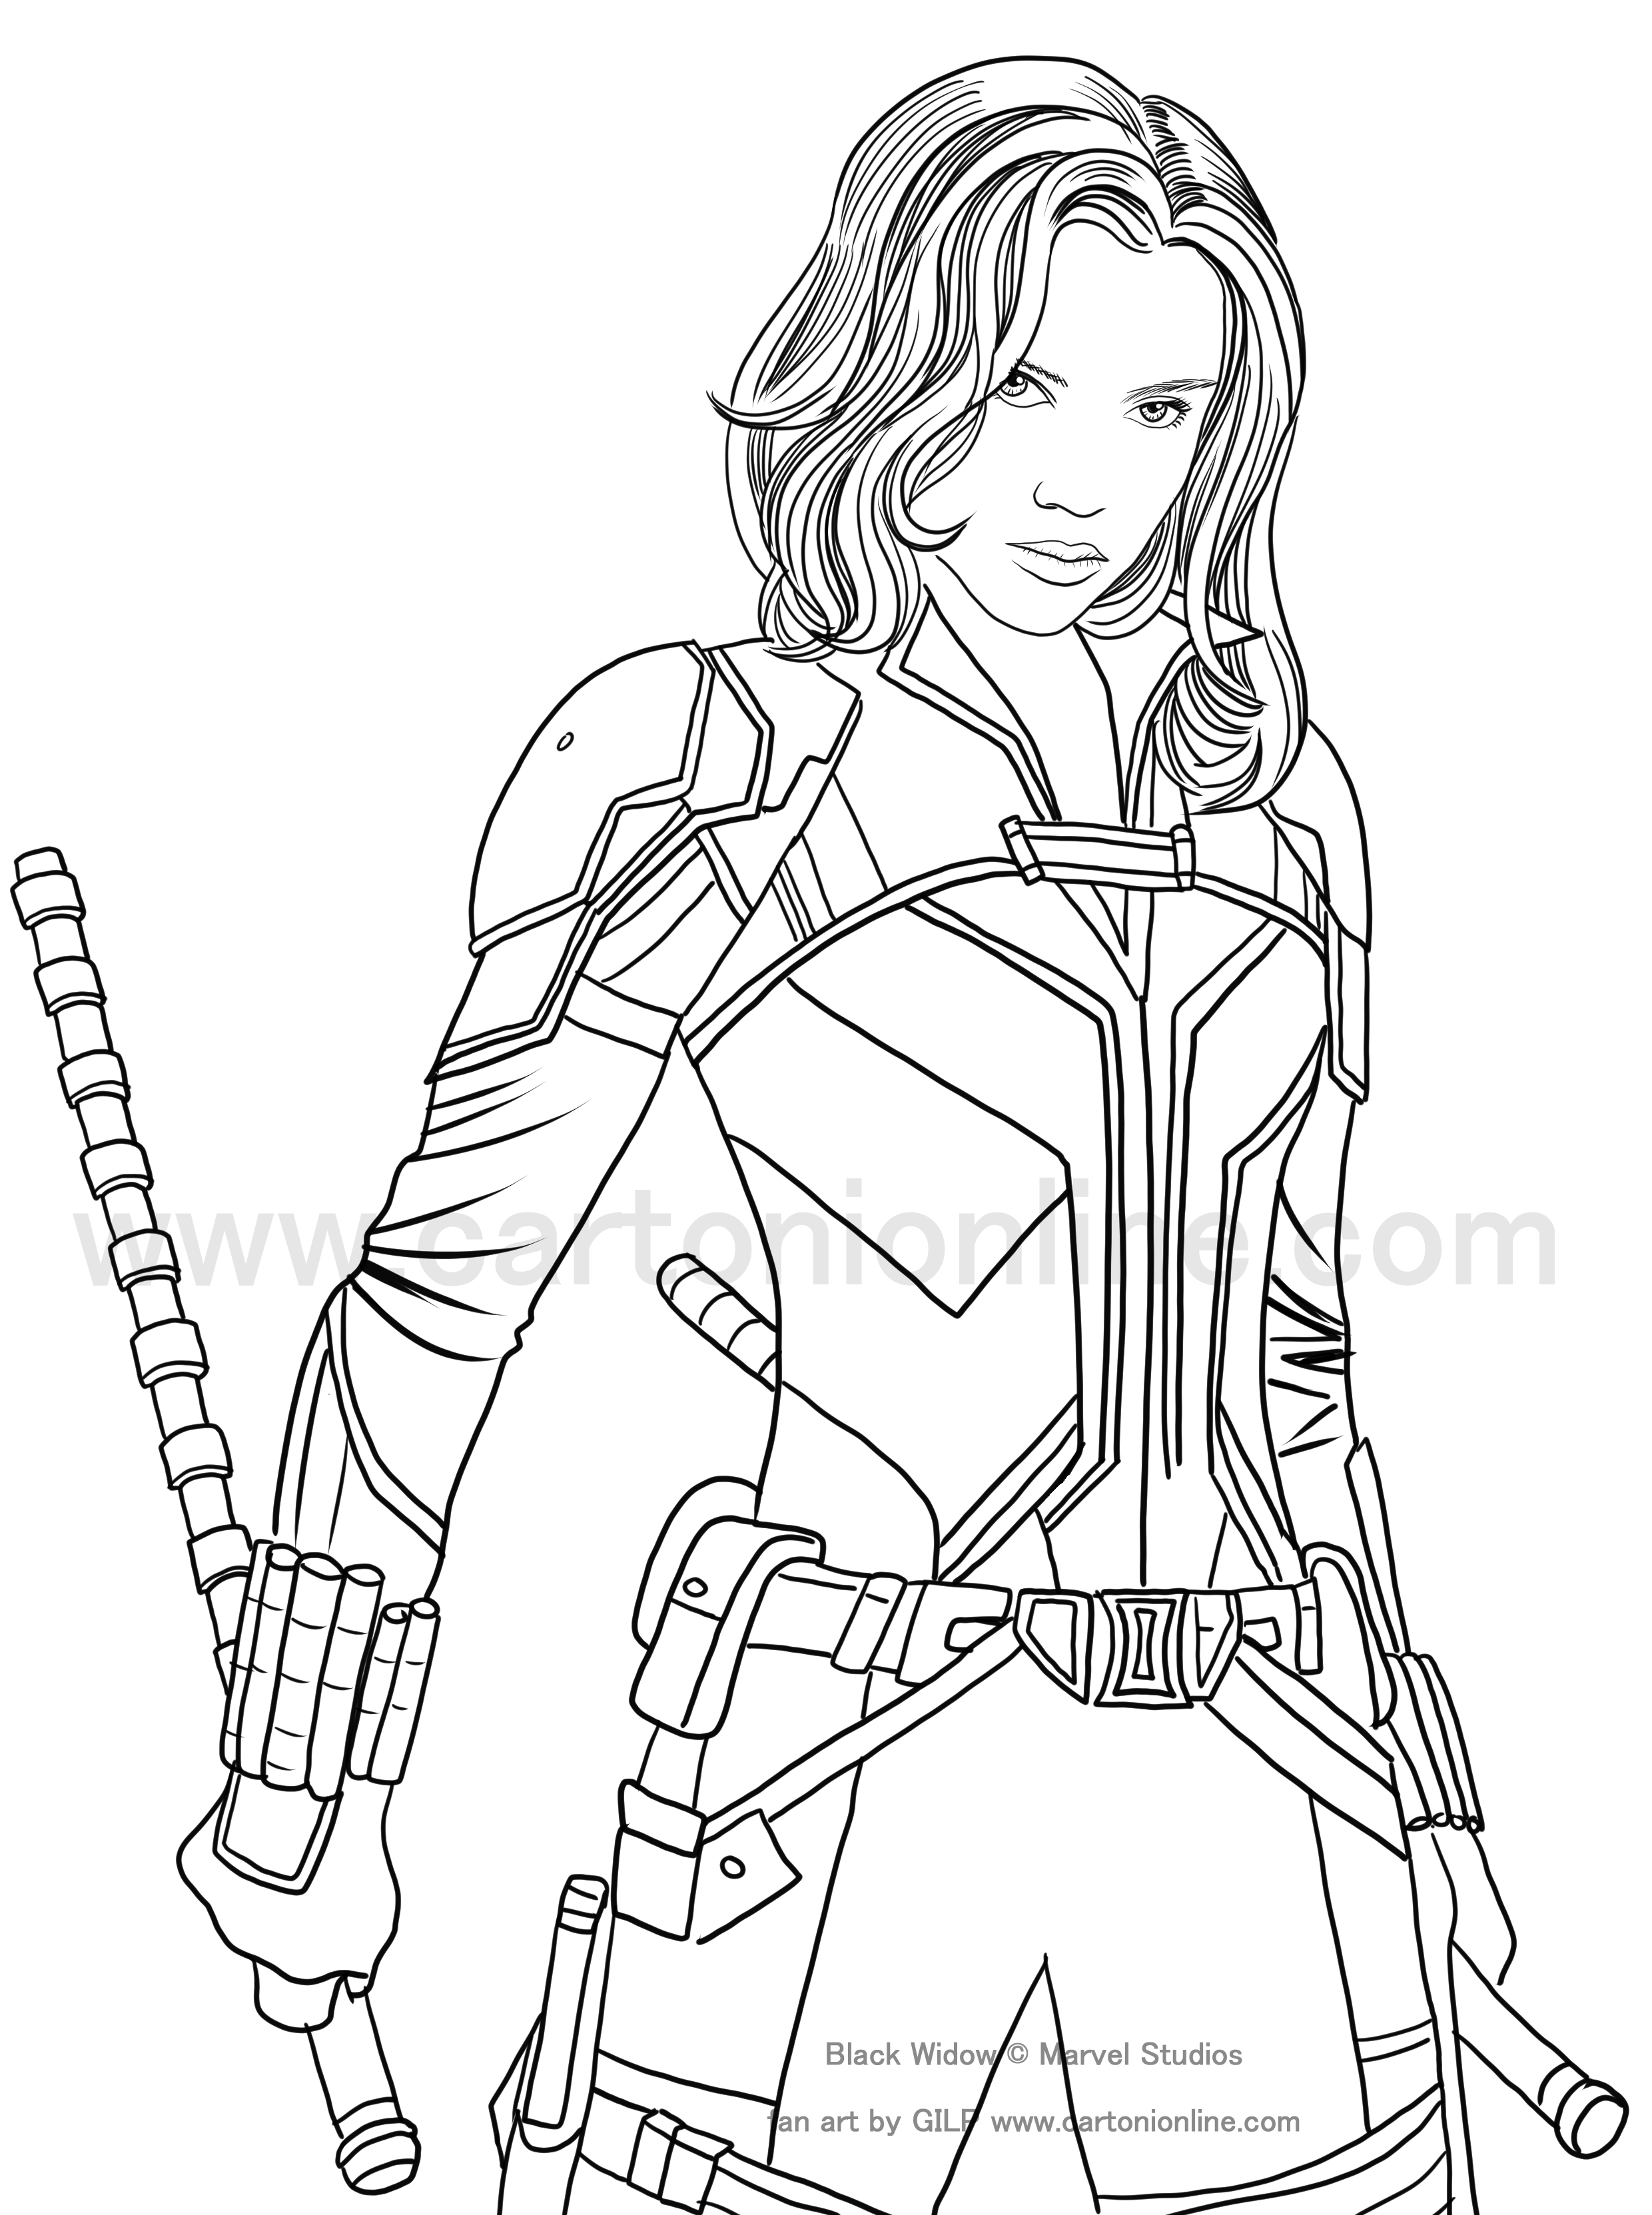 Black Widow (Scarlett Johansson) 02 from Black Widow (movie) coloring page to print and coloring